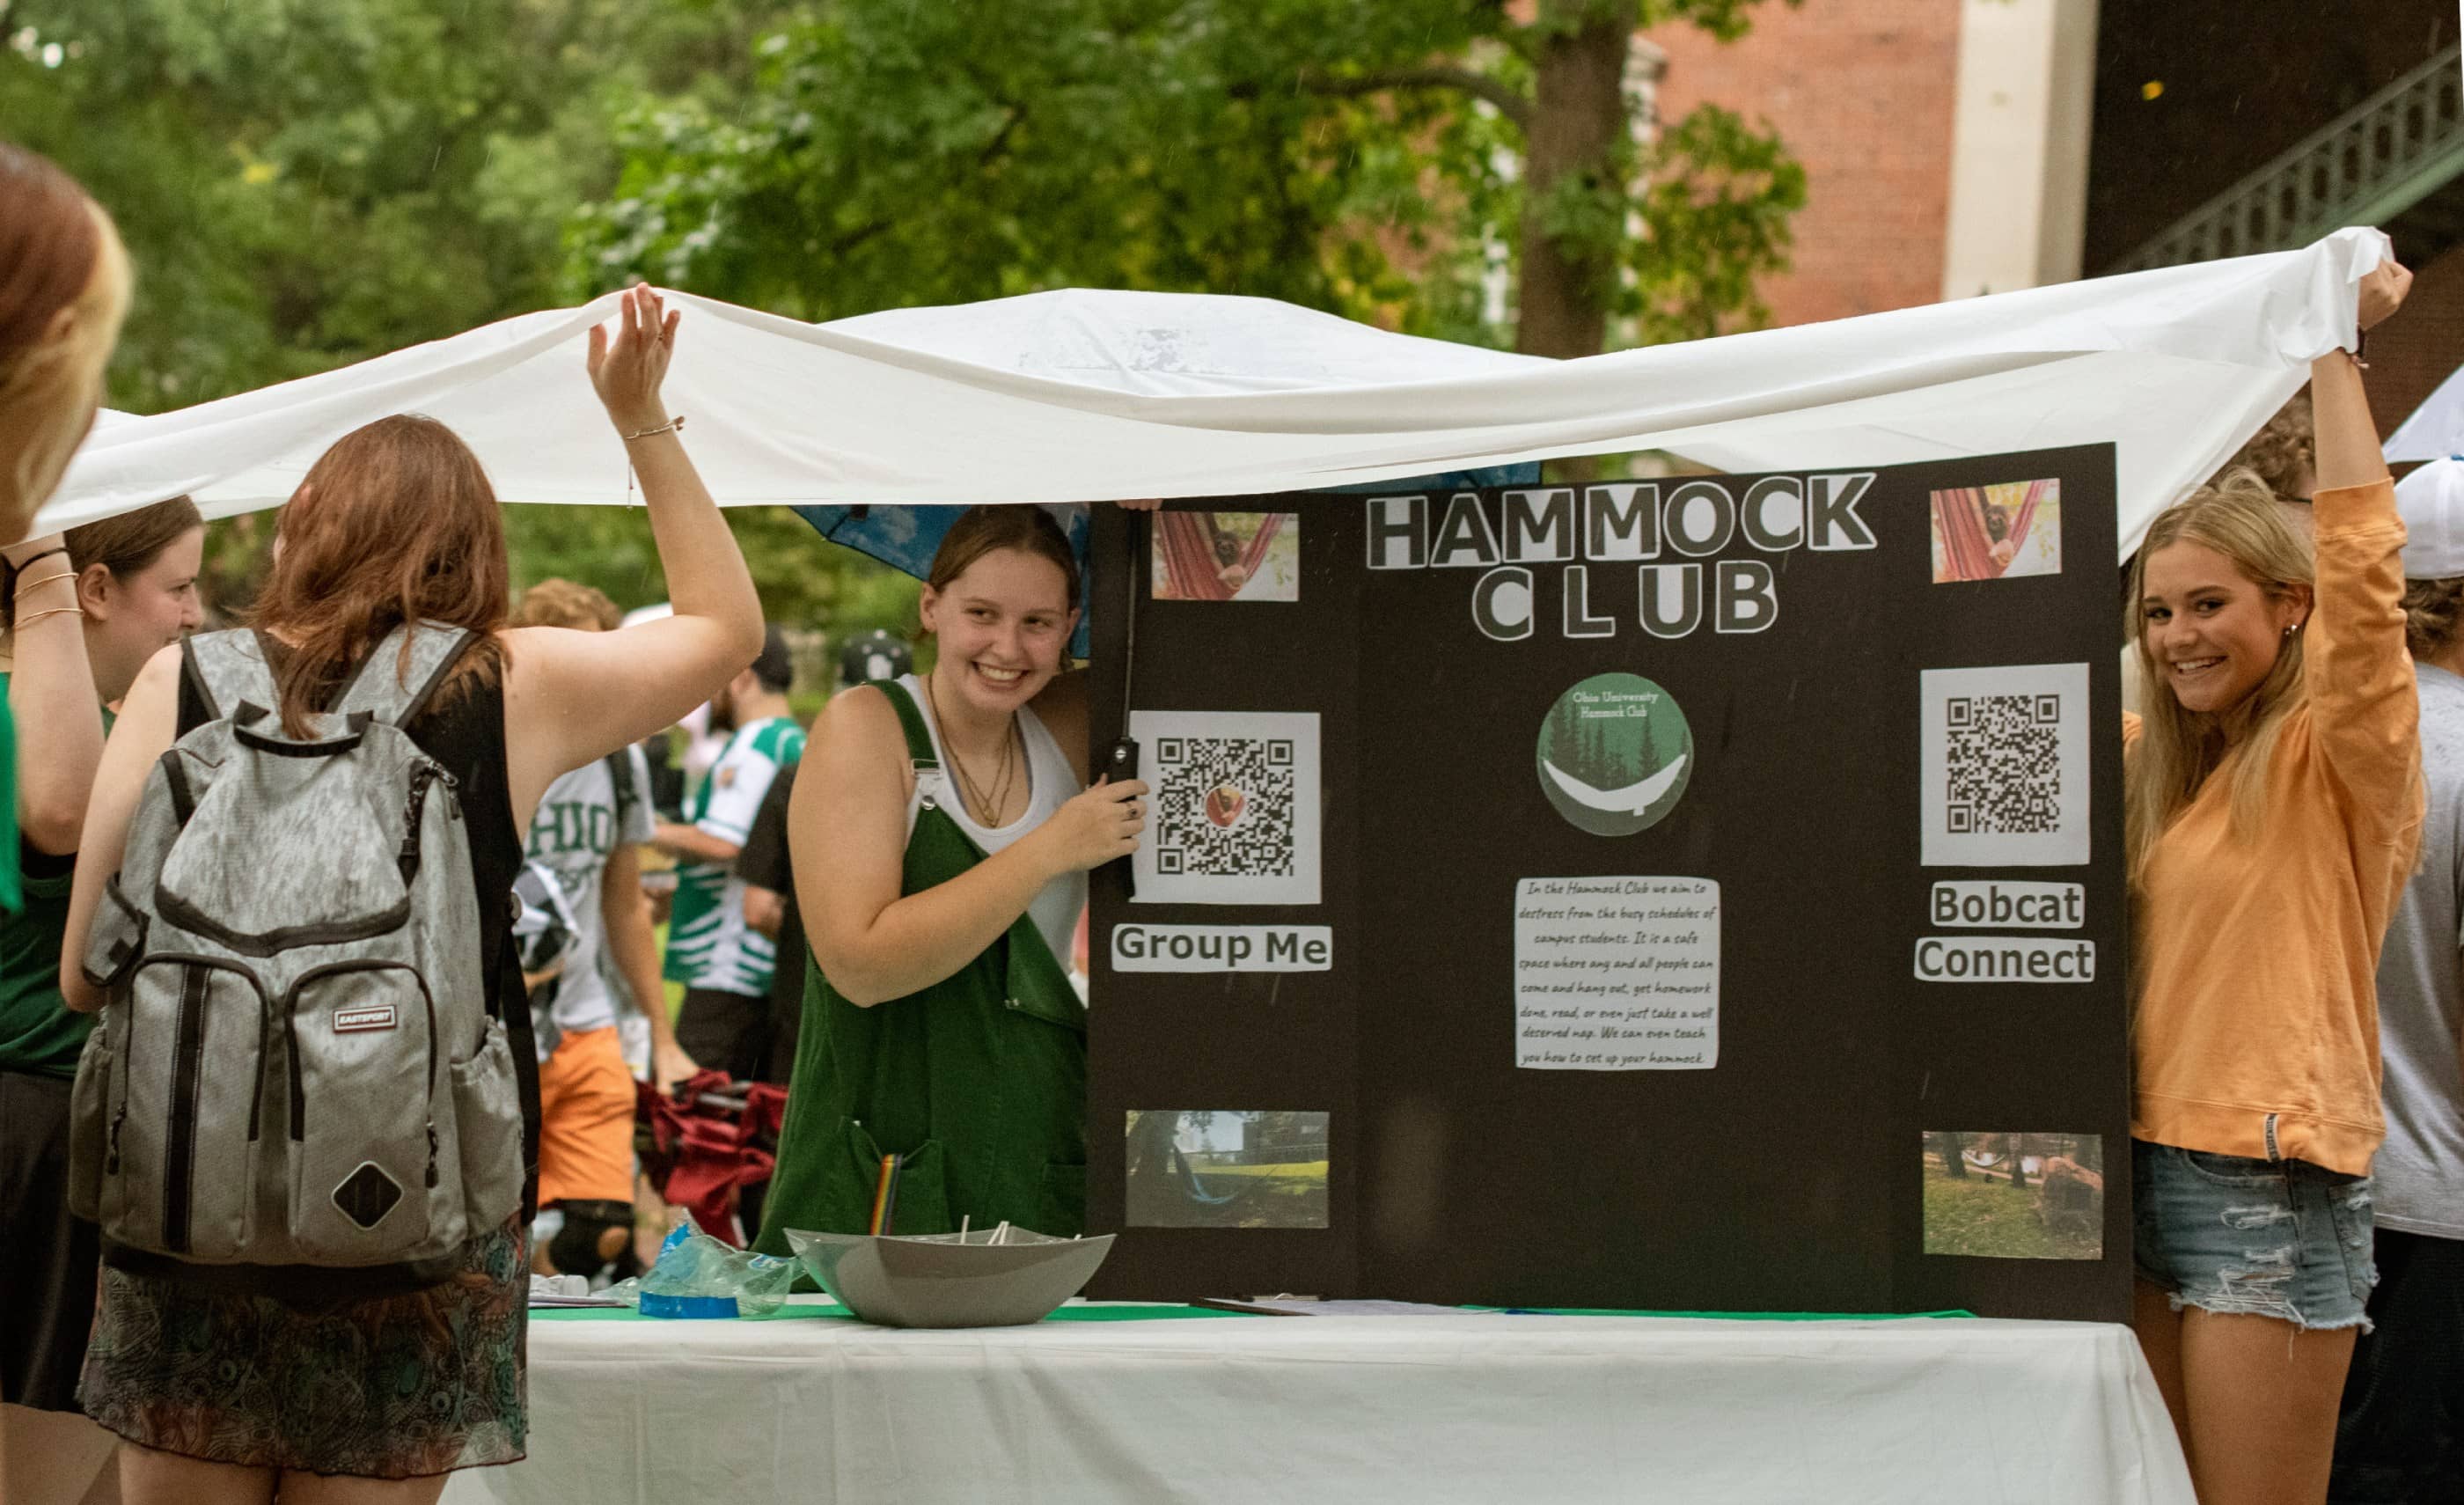 Members of the Hammock Club seek to avoid rain while recruiting members at the Student Organization Involvement Fair on College Green.